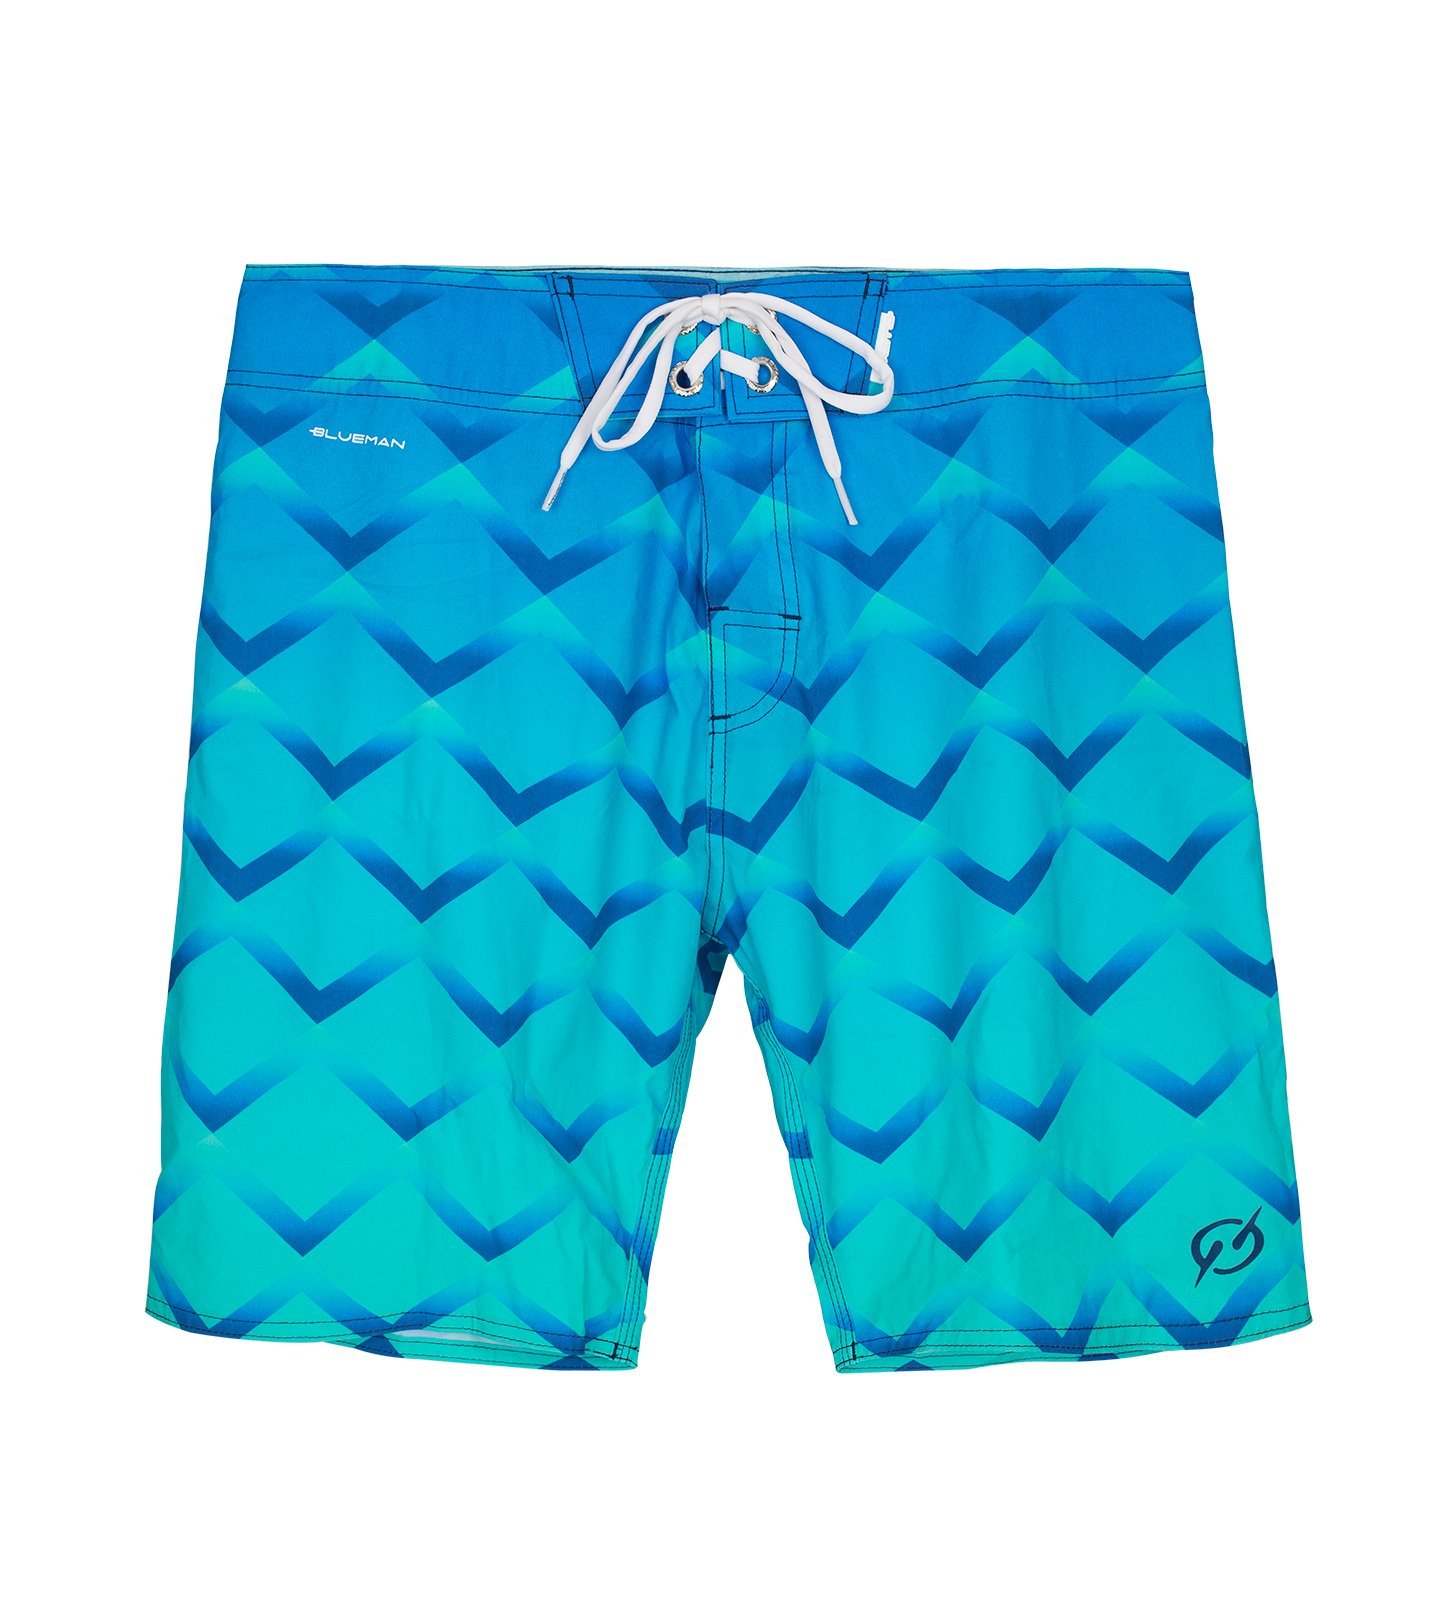 Swim Shorts Geometric Pattern Over blended Shades Of Blue - Mid Osorno ...